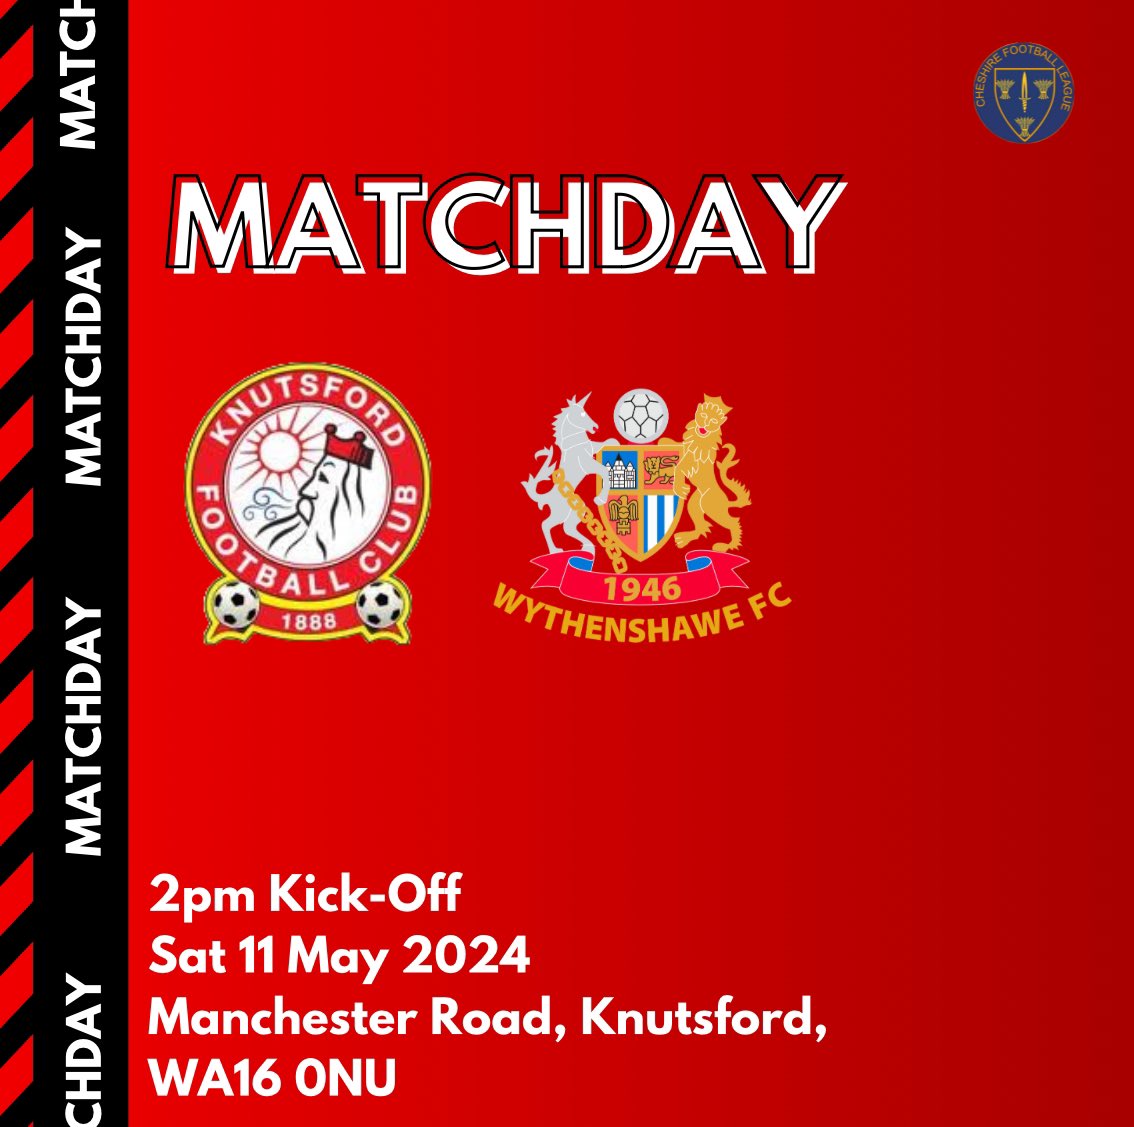 MATCHDAY!

At 2pm, we face @KnutsfordFC in a crucial game that could secure safety from relegation 🔓

🎟️ Tickets: £2 (£1 concessions)

📍Knutsford FC, Manchester Rd, Knutsford WA16 0NU

⚽️ 2PM

We hope to see as many faces down there as possible!

#UpTheAmmies 🔵⚪️